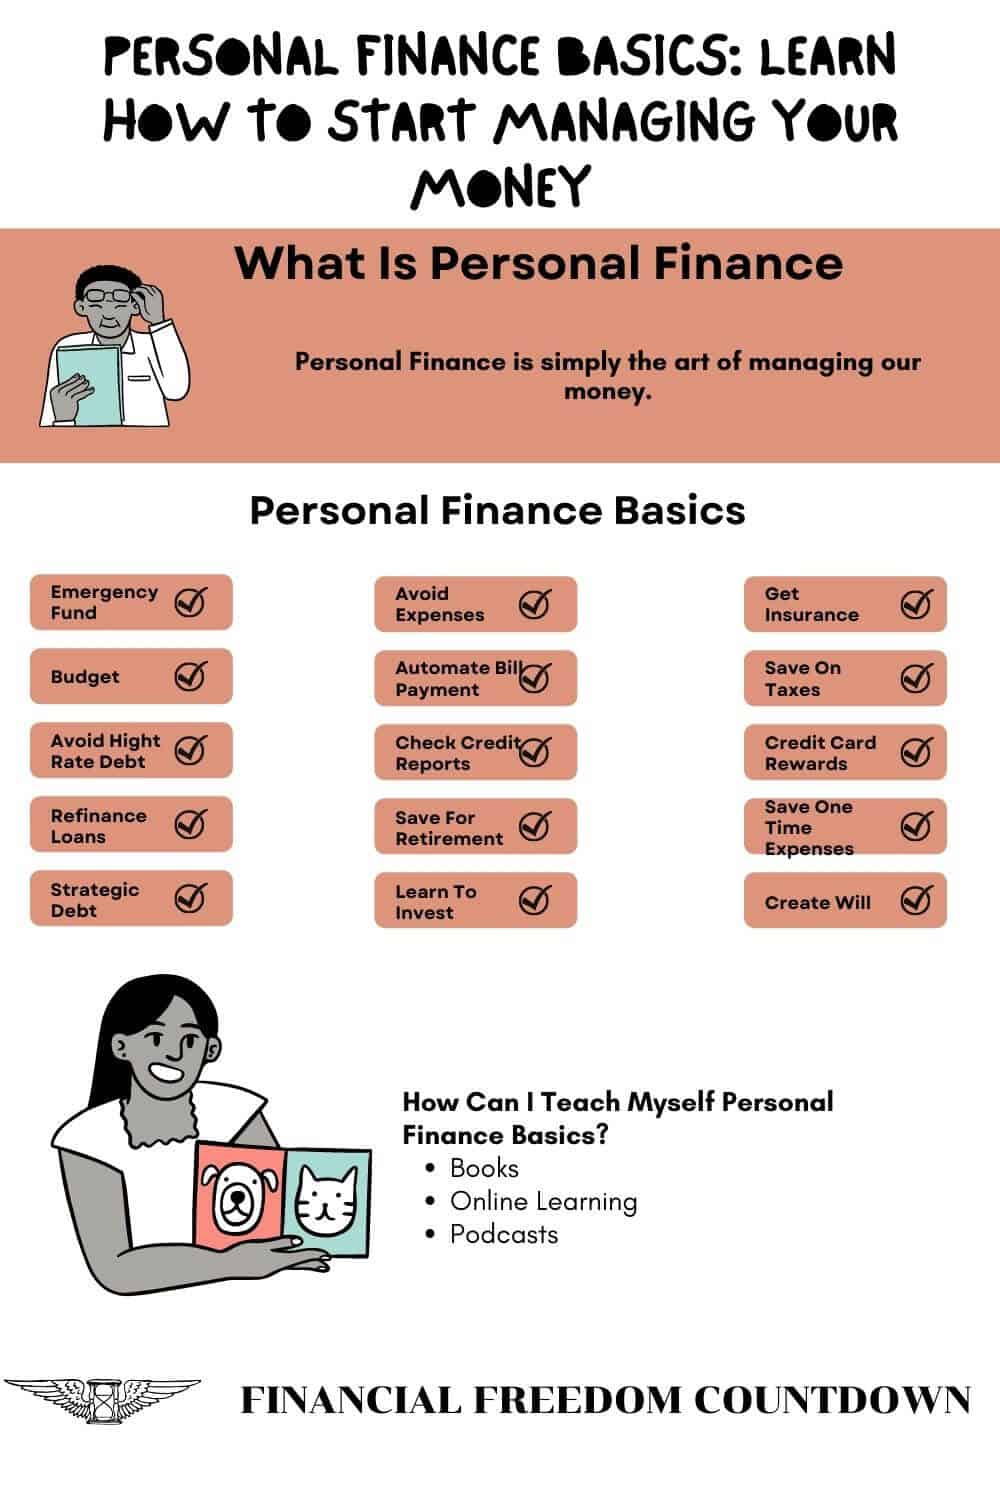 Personal Finance Basics Learn How To Start Managing Your Money